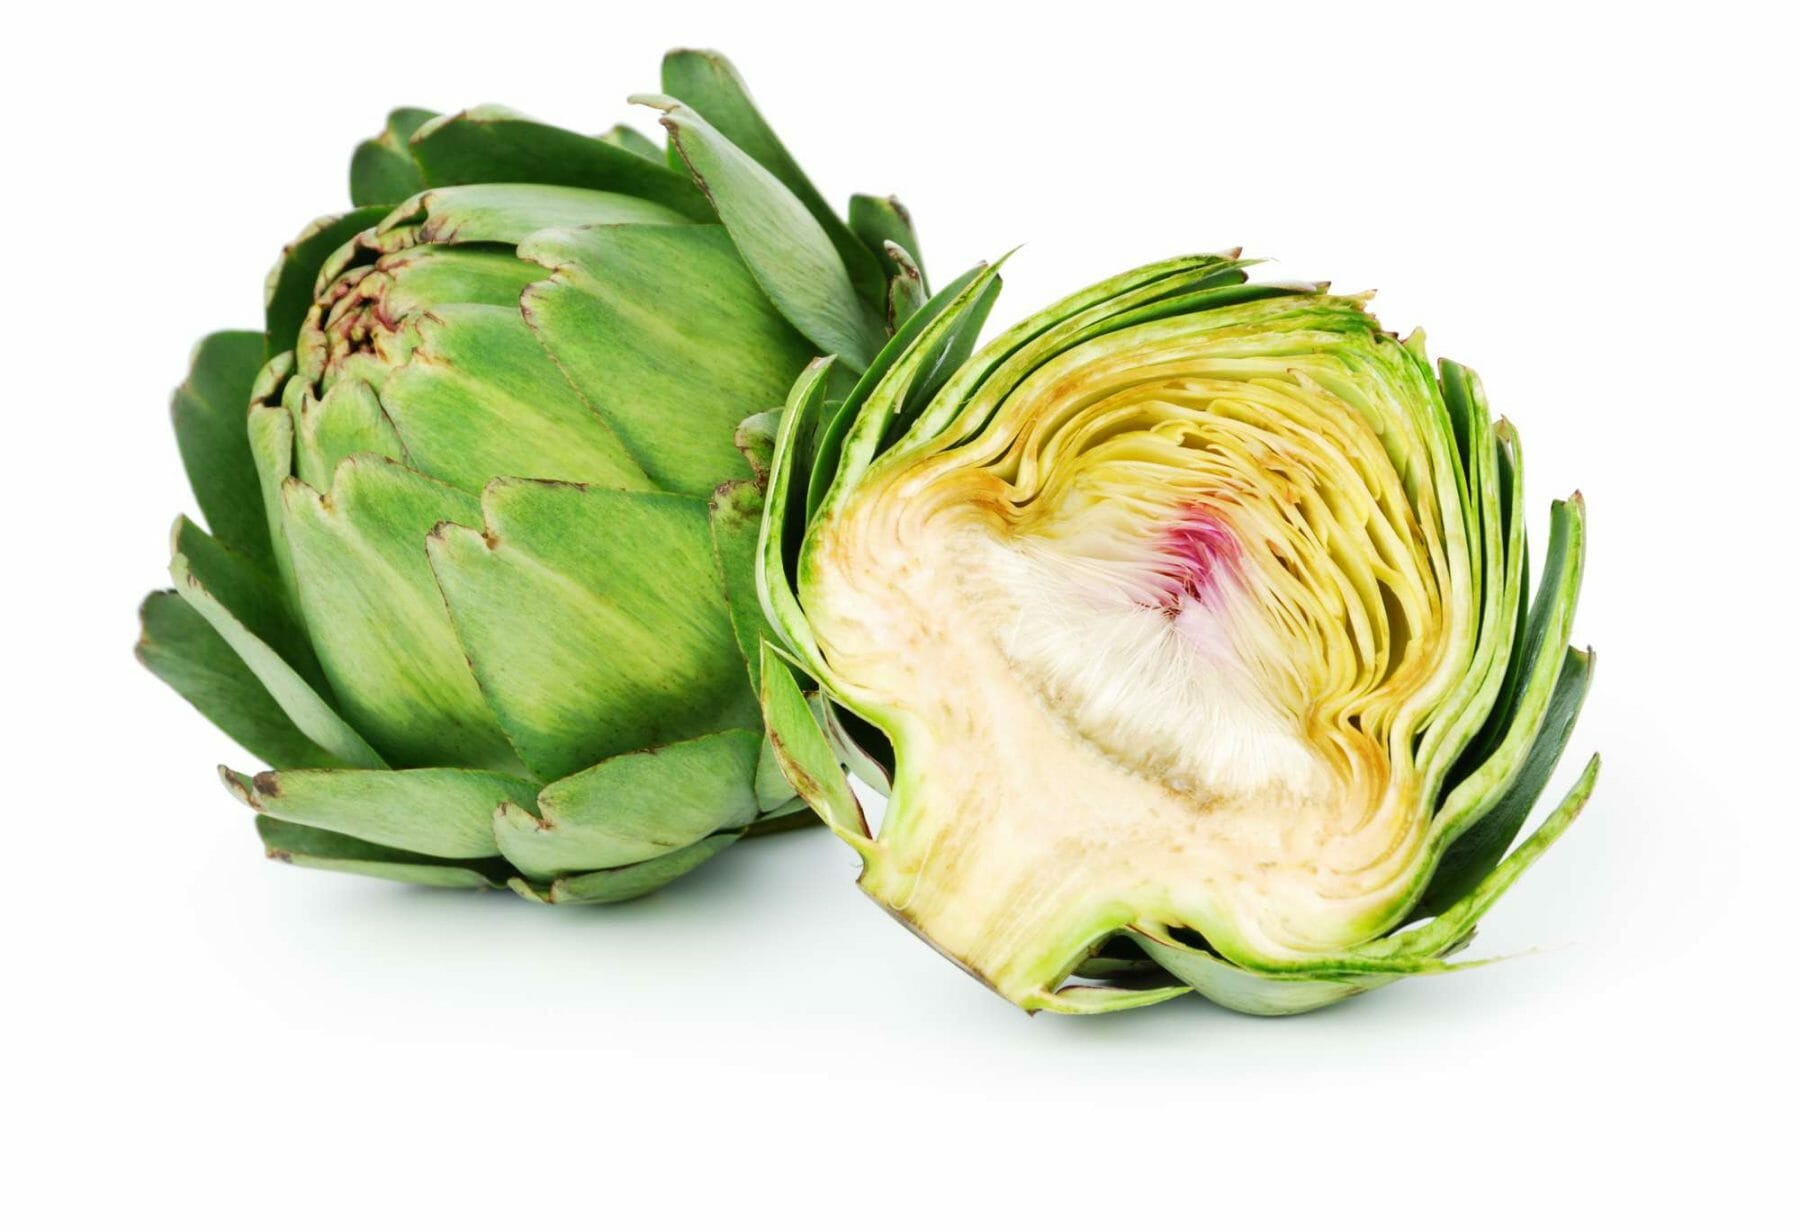 How Can You Tell If Raw Artichoke Is Bad?